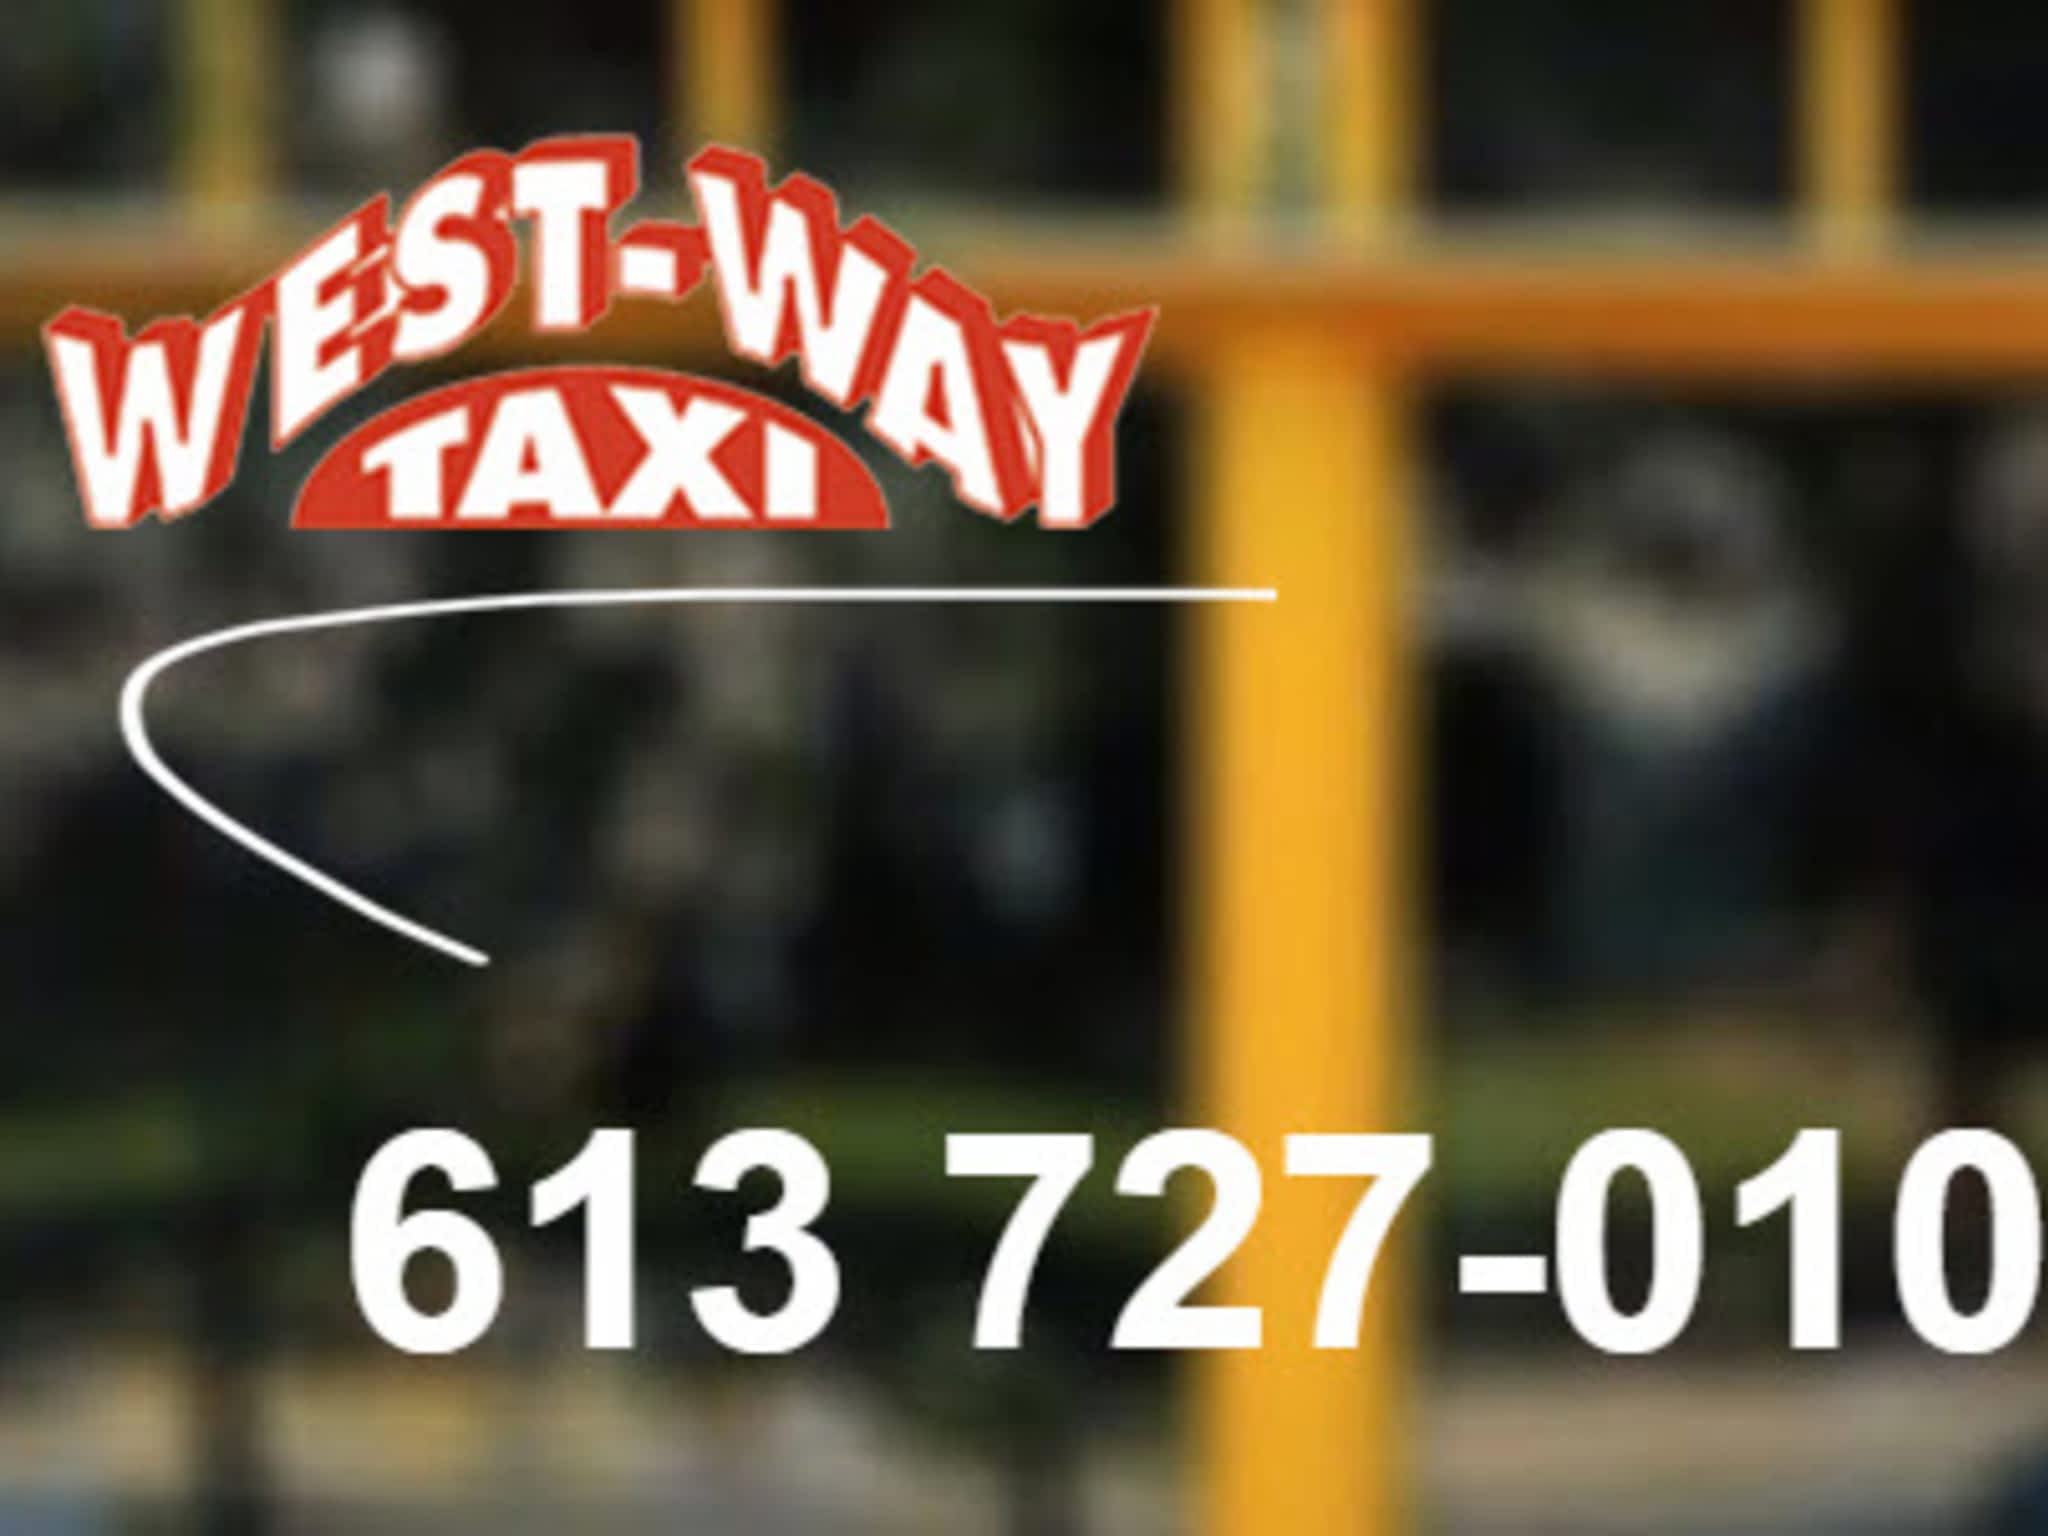 photo West Way Taxi